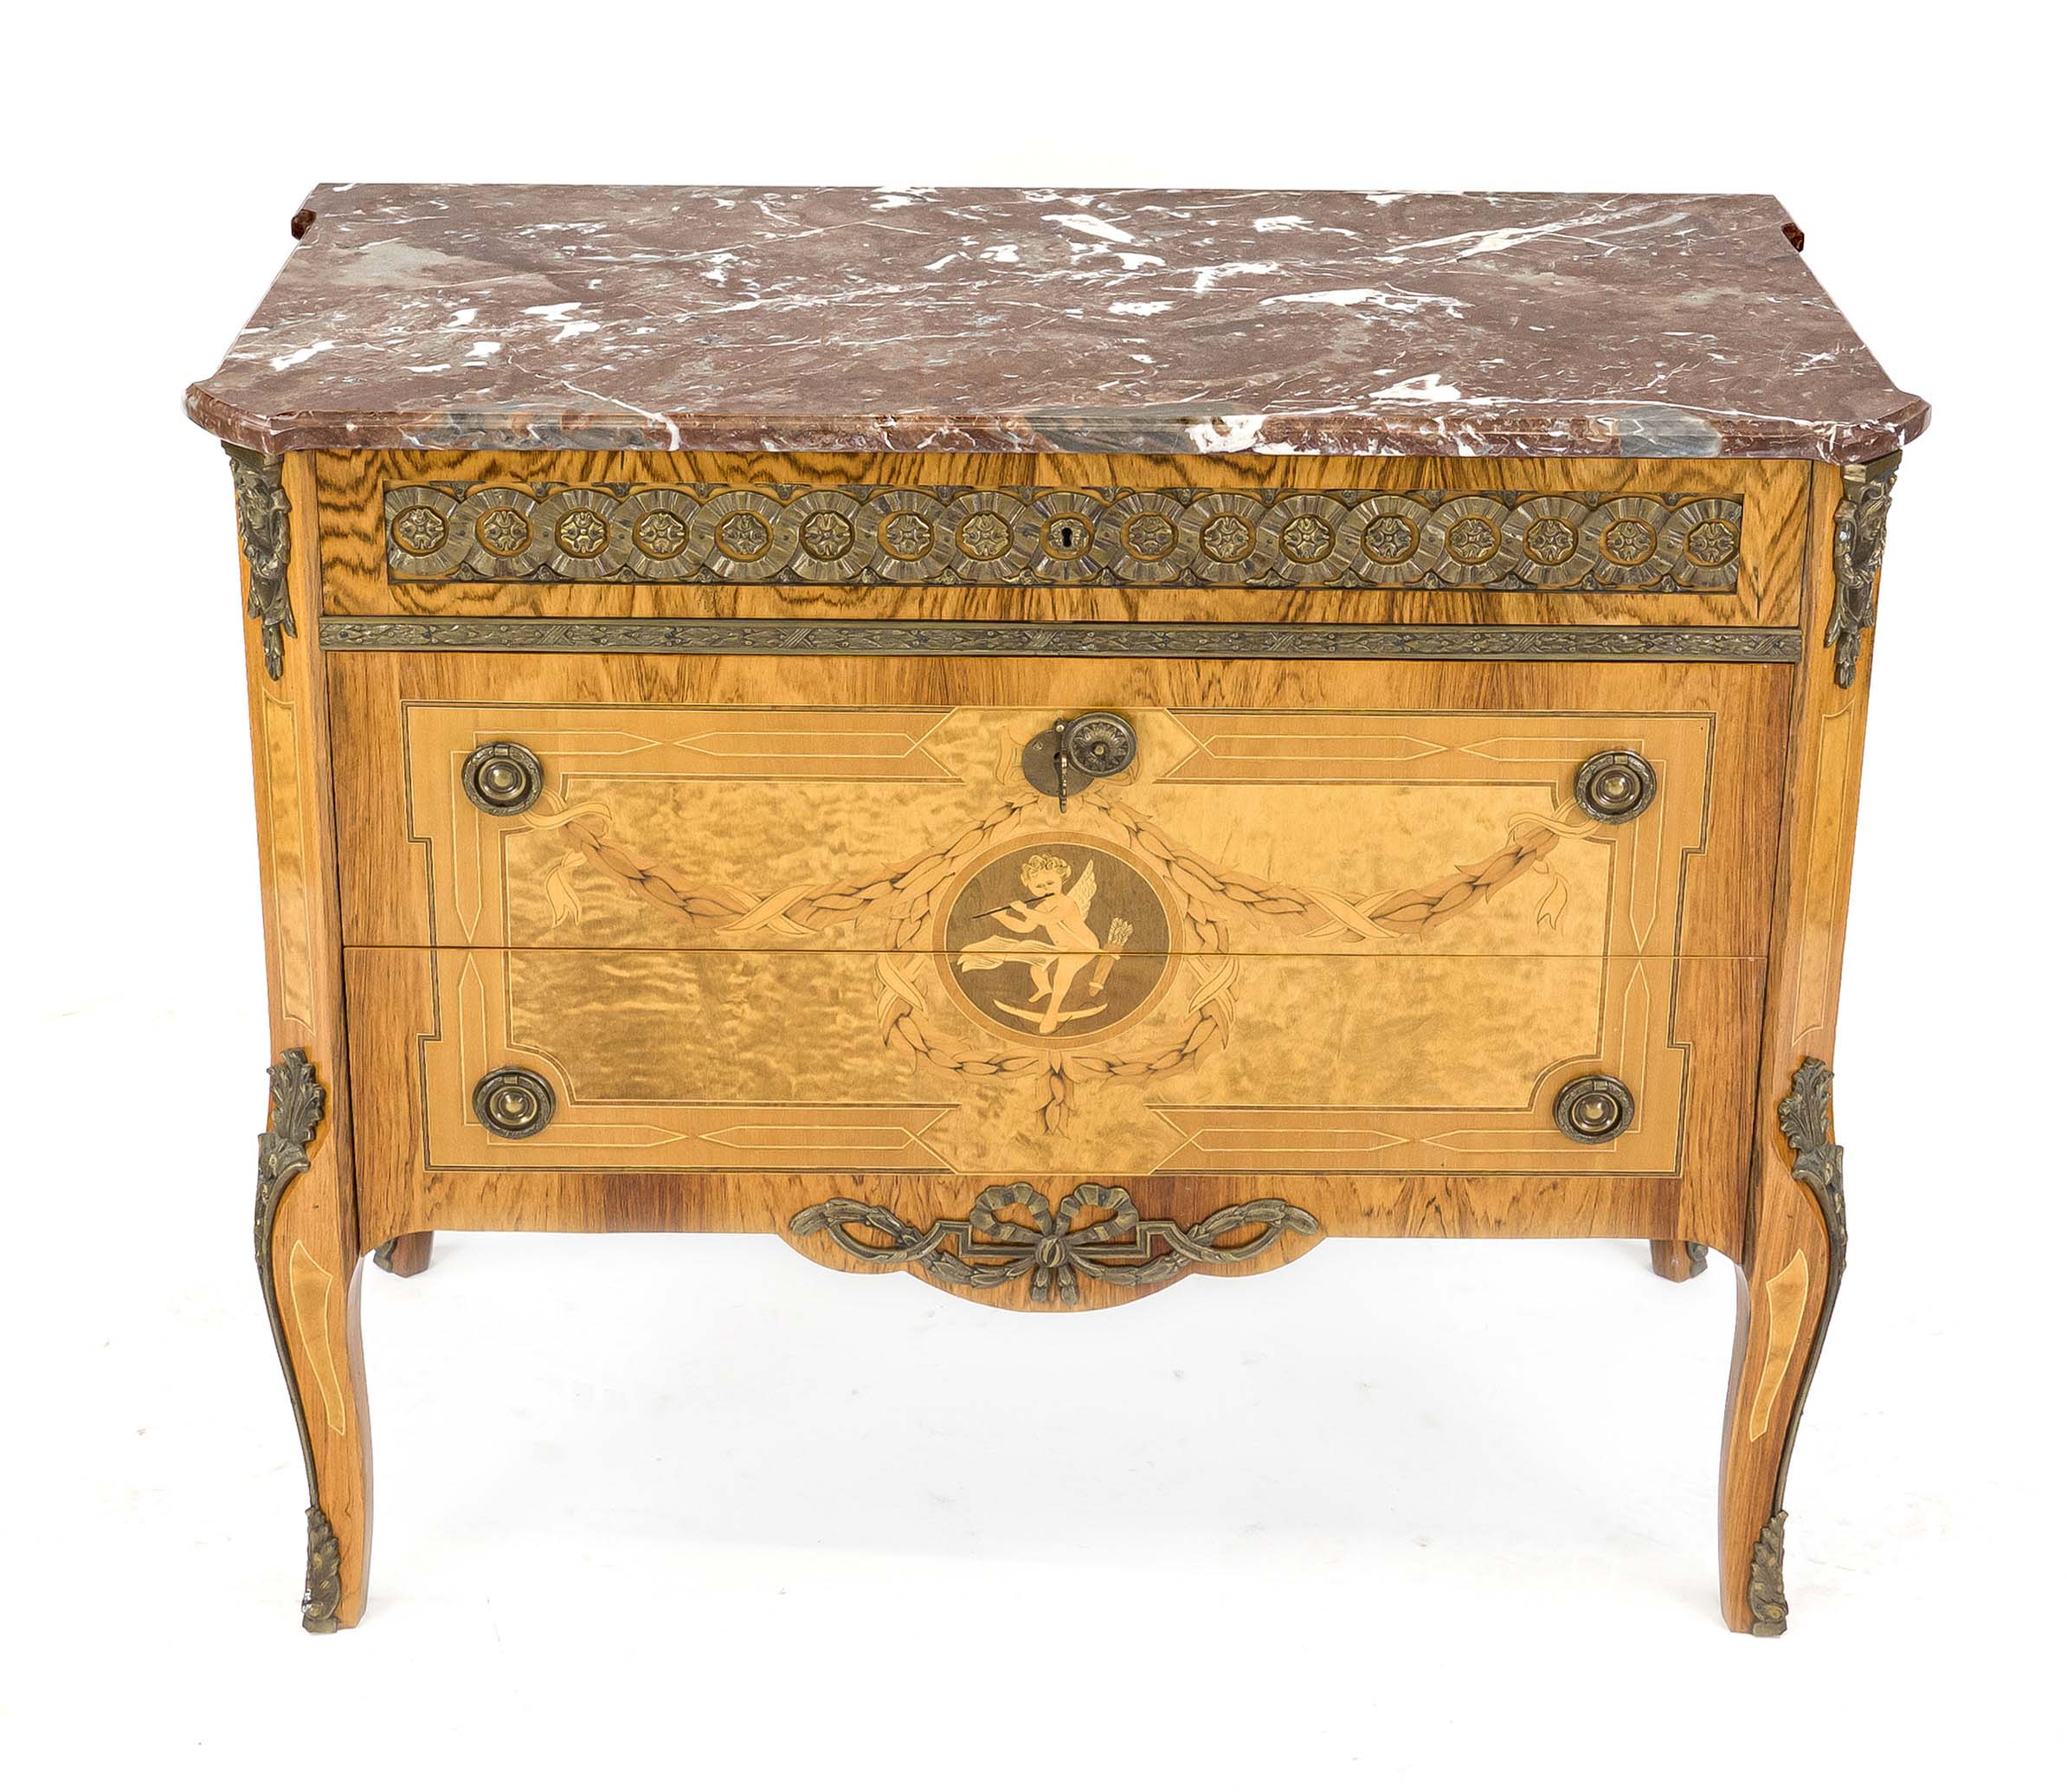 Classicist-style chest of drawers, 20th century, various precious woods veneered and inlaid, body